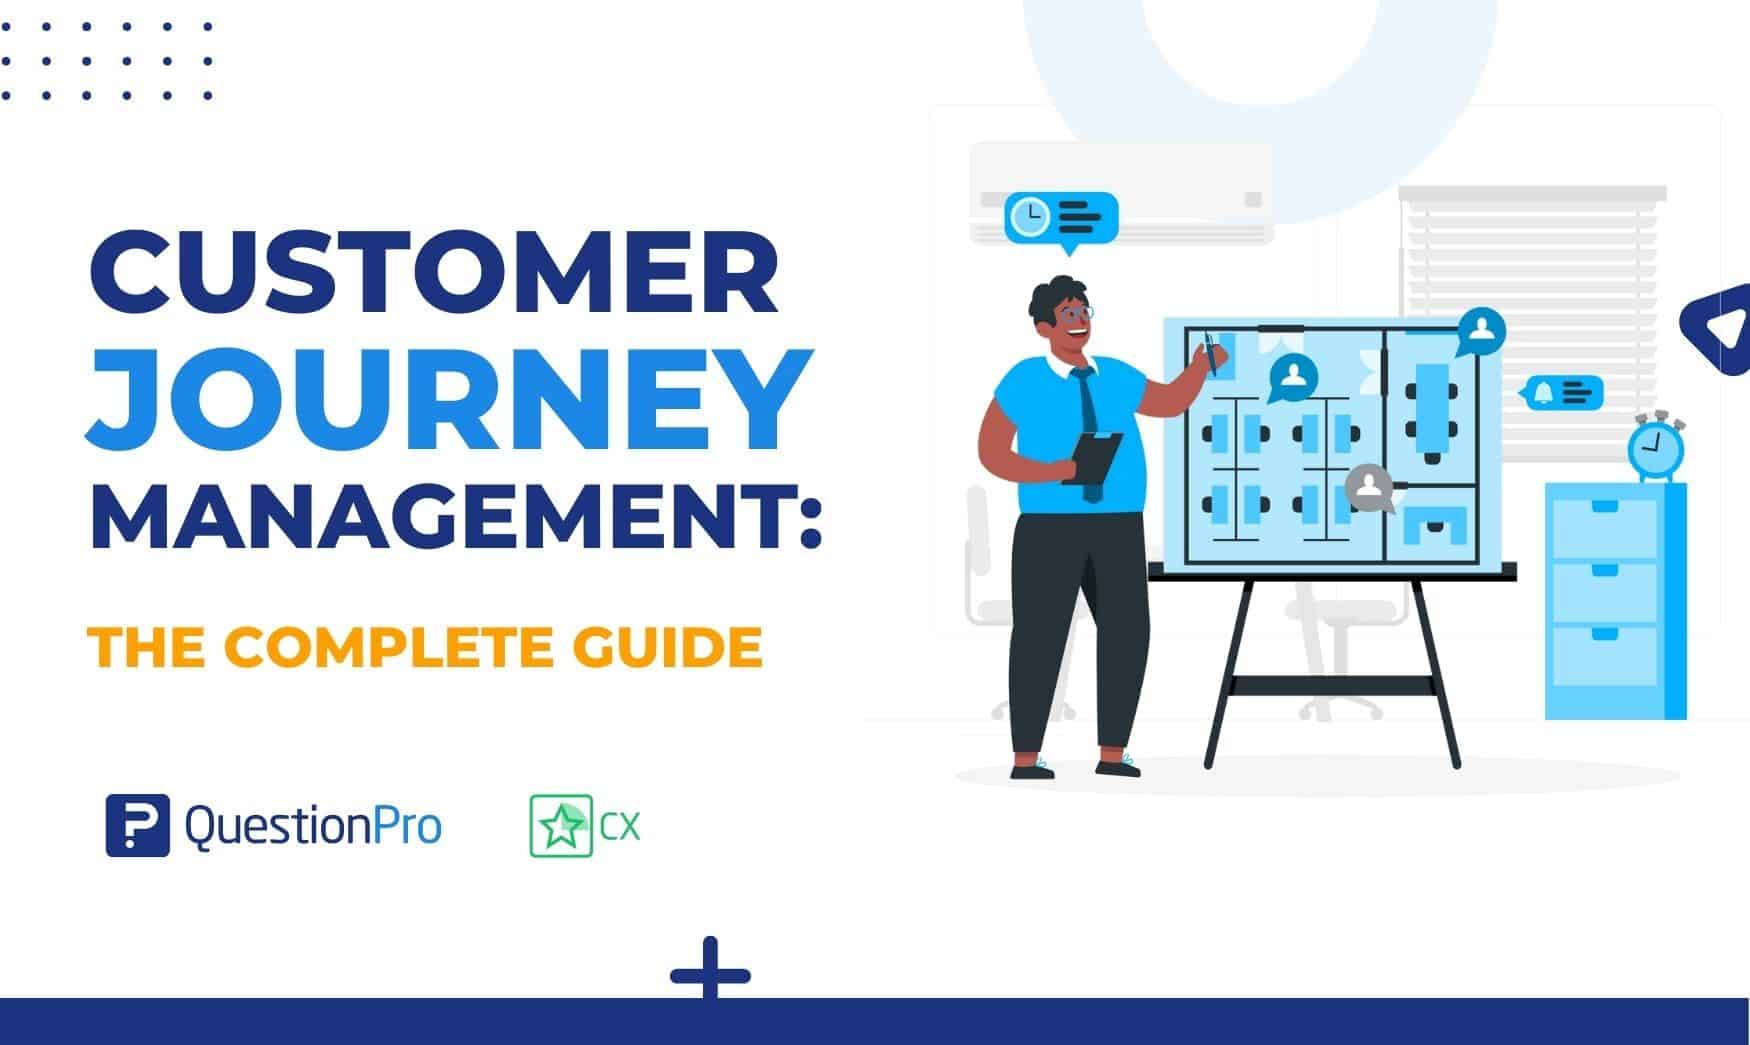 Customer journey management is a tried-and-true way to give your customers the seamless experiences they want. Learn more in this article.